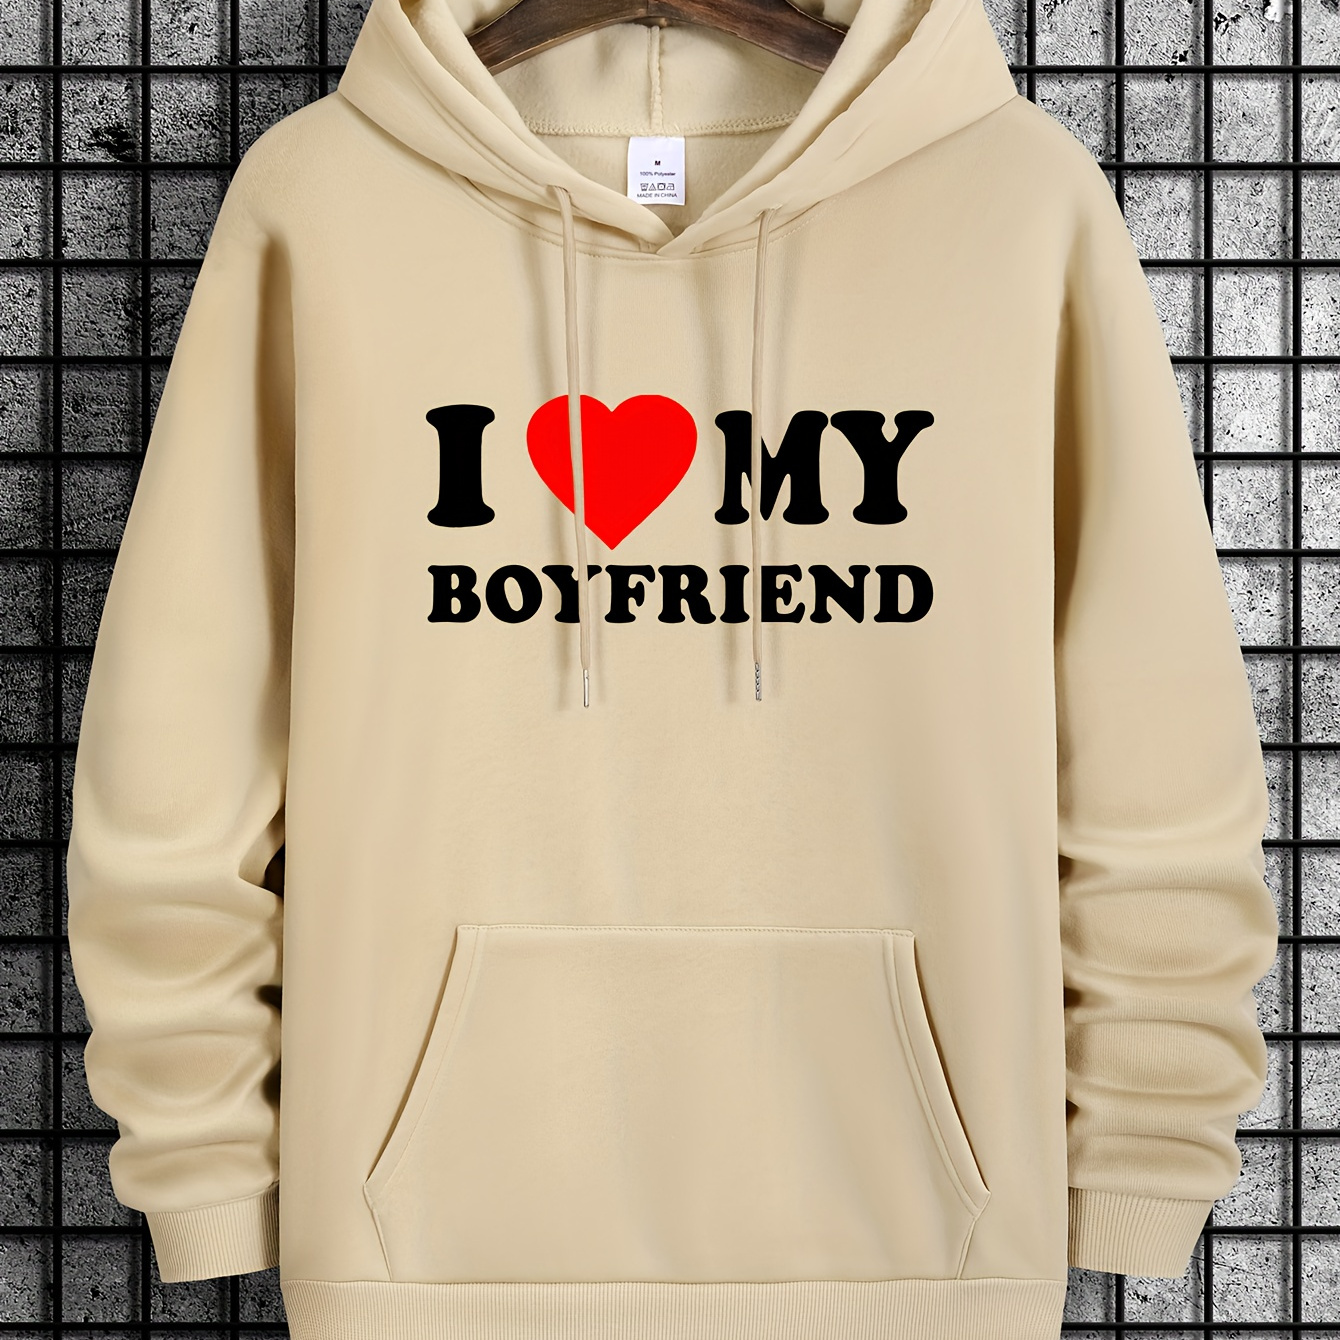 

I Love My Boyfriend Print Men's Warm Pullover Round Neck Hooded Sweatshirt Print Hoodie Casual Top For Autumn Winter Men's Clothing As Gifts